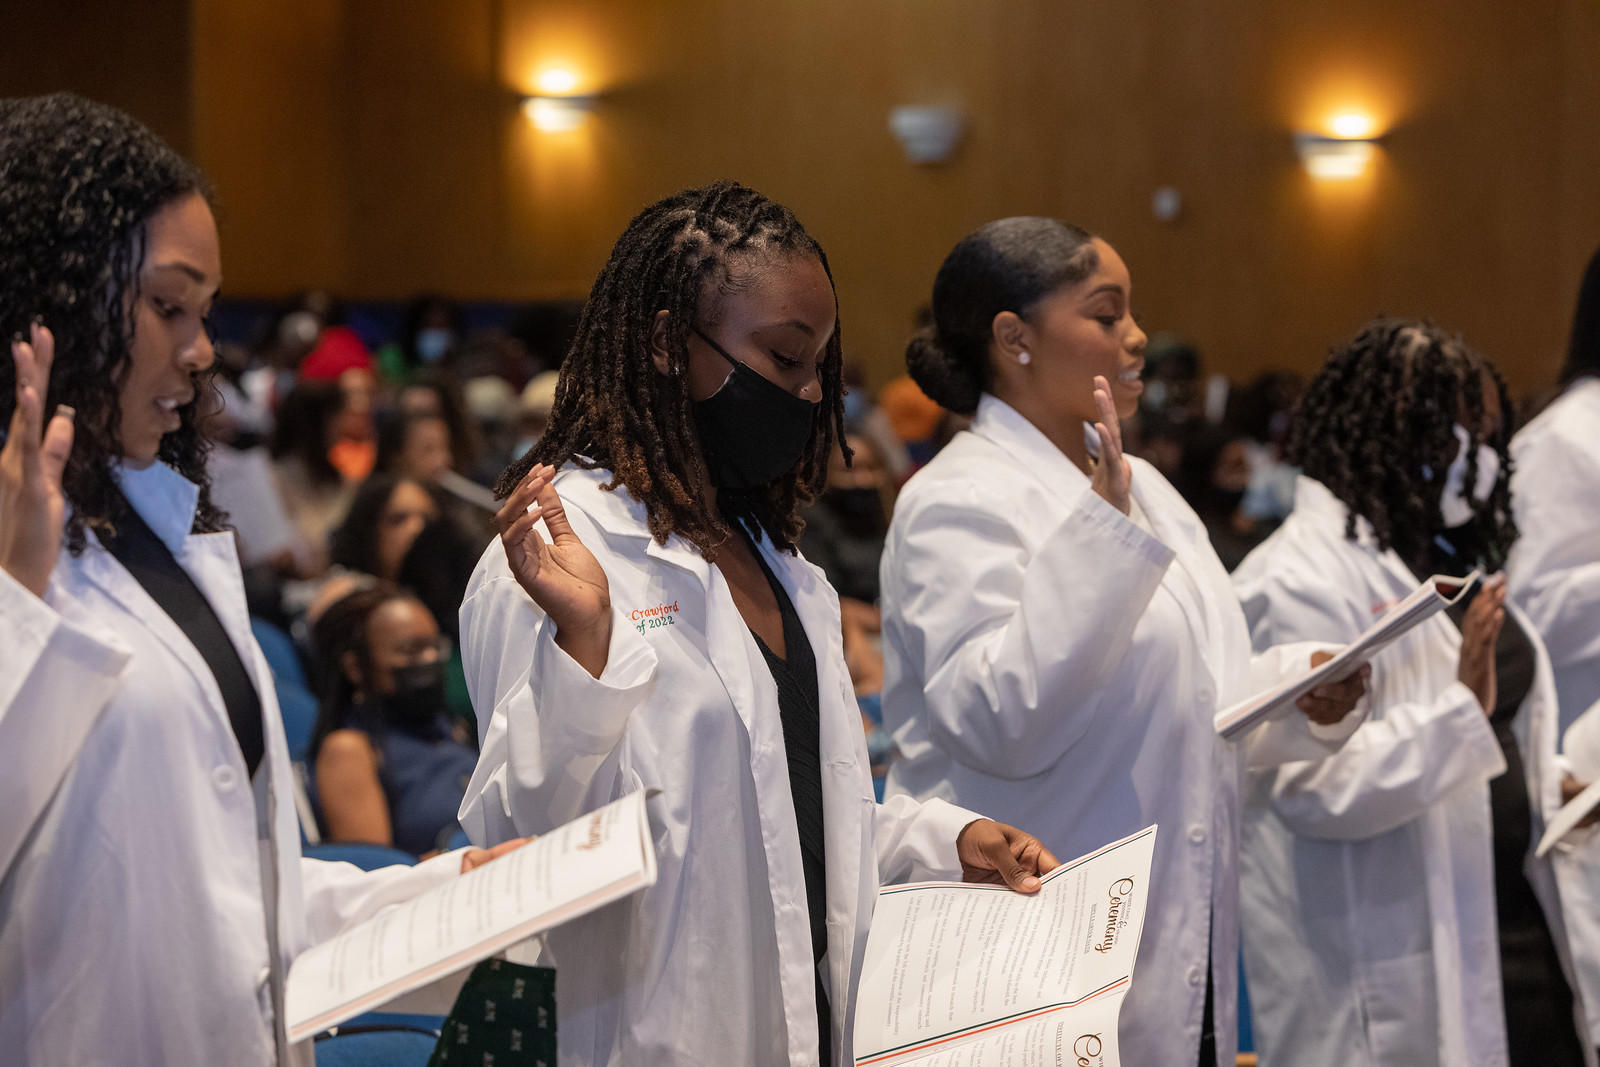 Members of PharmD Class of 2022 taking the Pledge of Professionalism